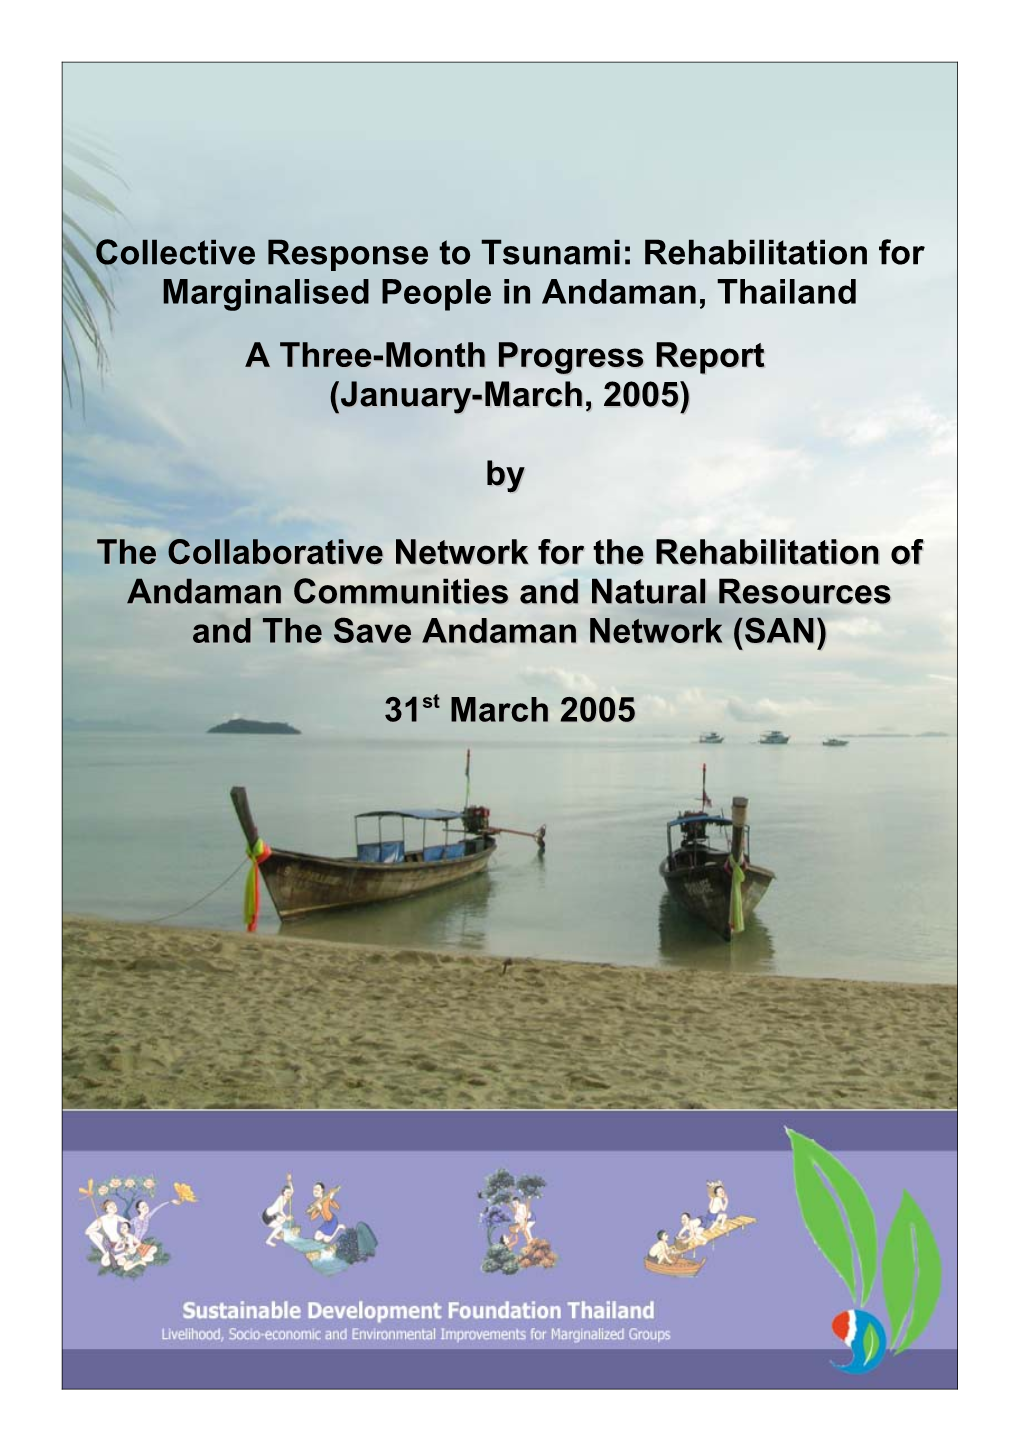 The Tsunami in Thailand and How Two Civil Society Networks Are Responding